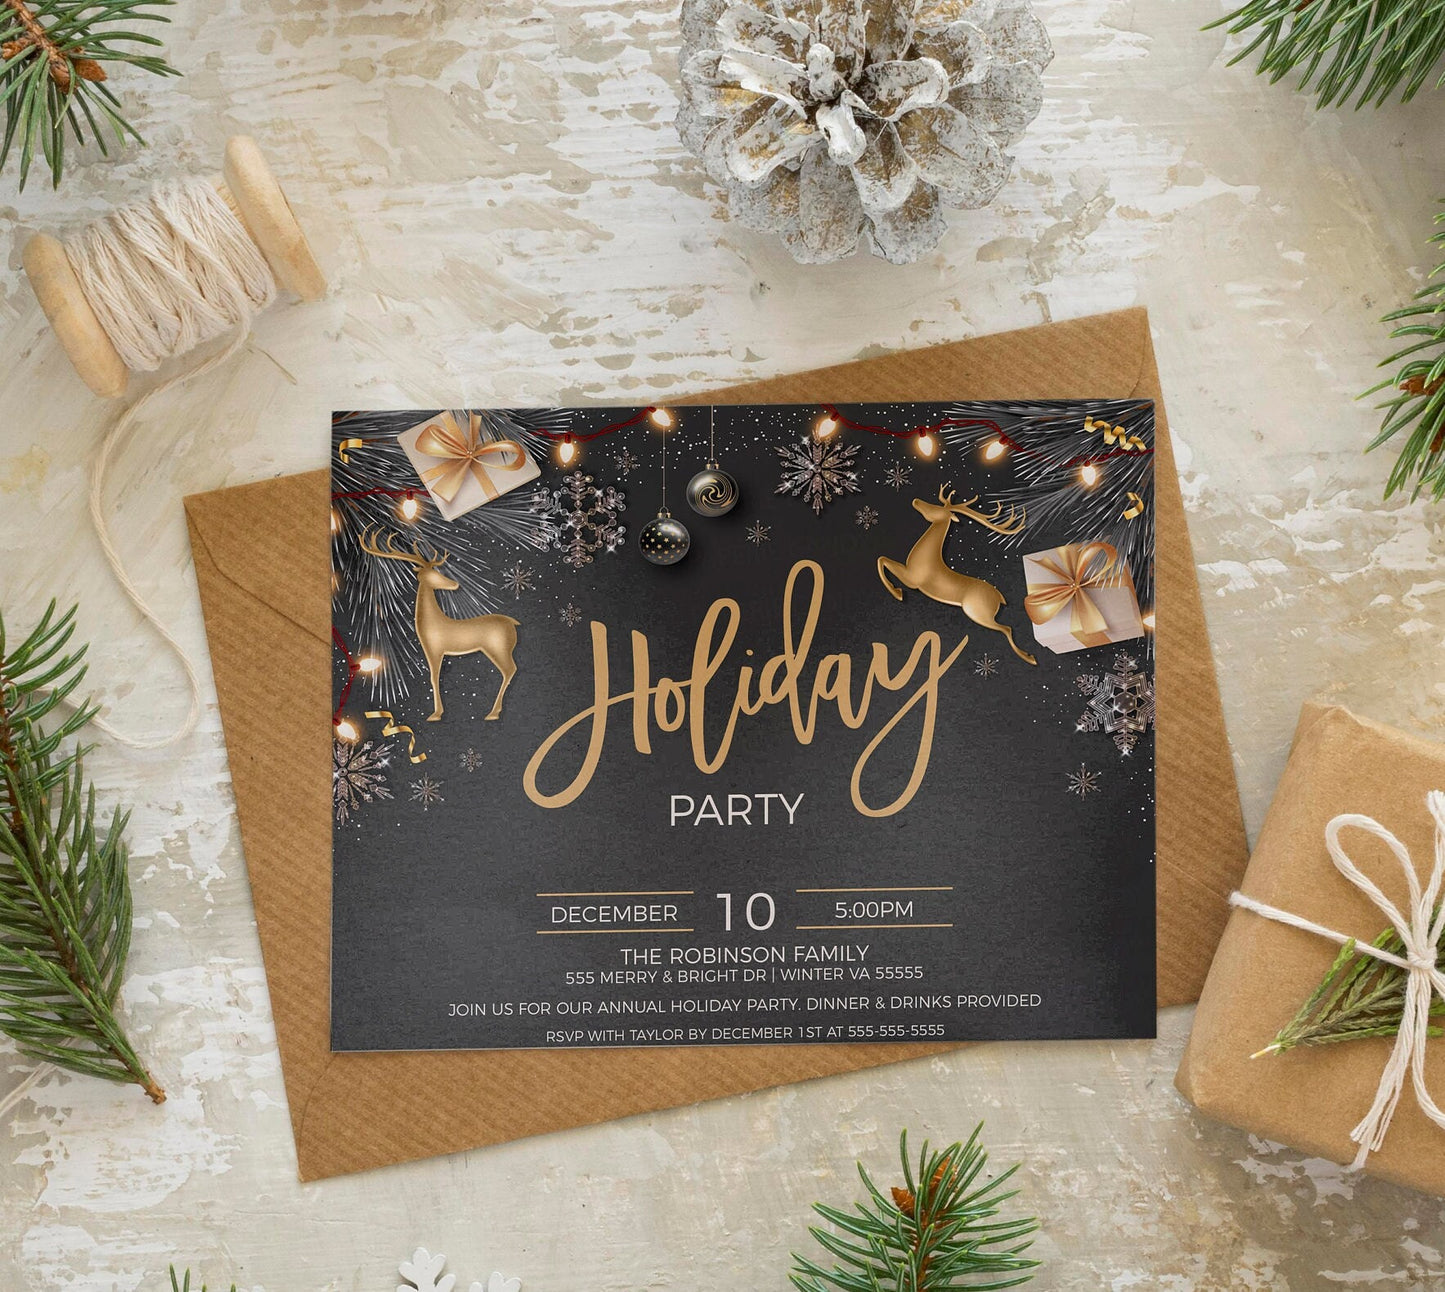 Holiday Party Invitation, Editable Christmas Brunch Lunch Dinner Breakfast Invite, Business Company Staff Employee, Potluck, Printable